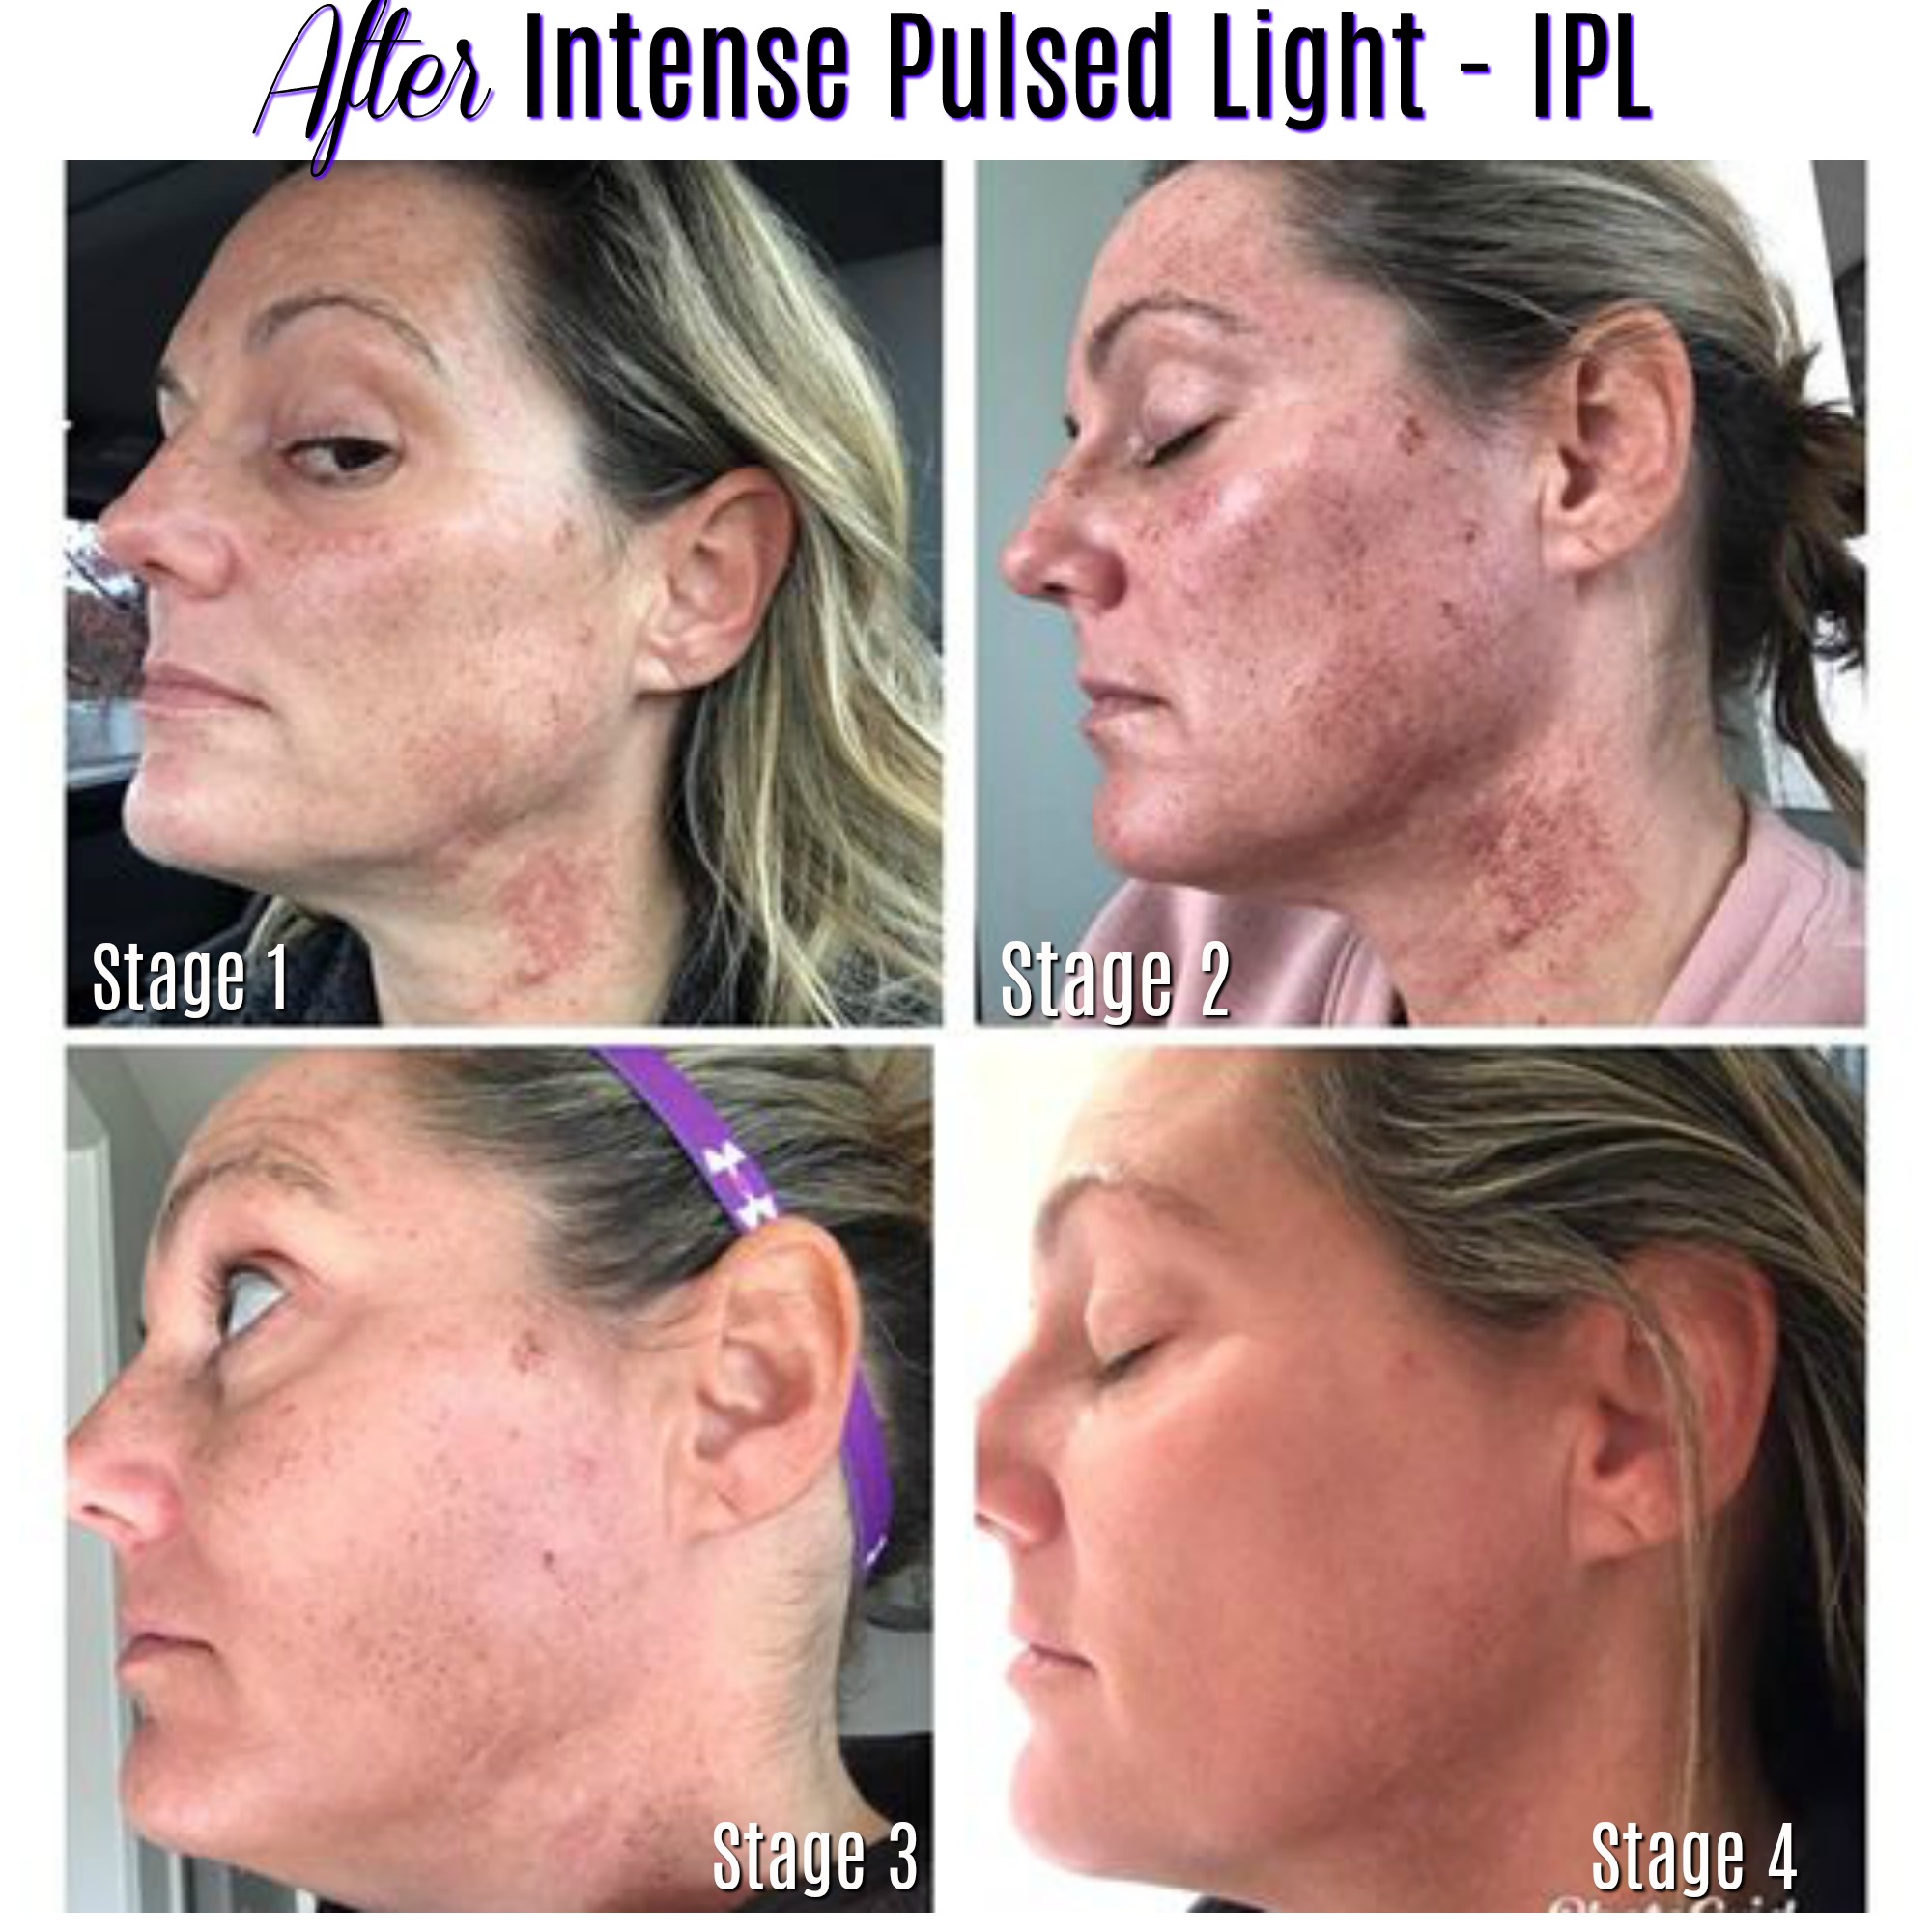 IPL for Brown and Red Spots Bend OR, IPL Treatment Redmond